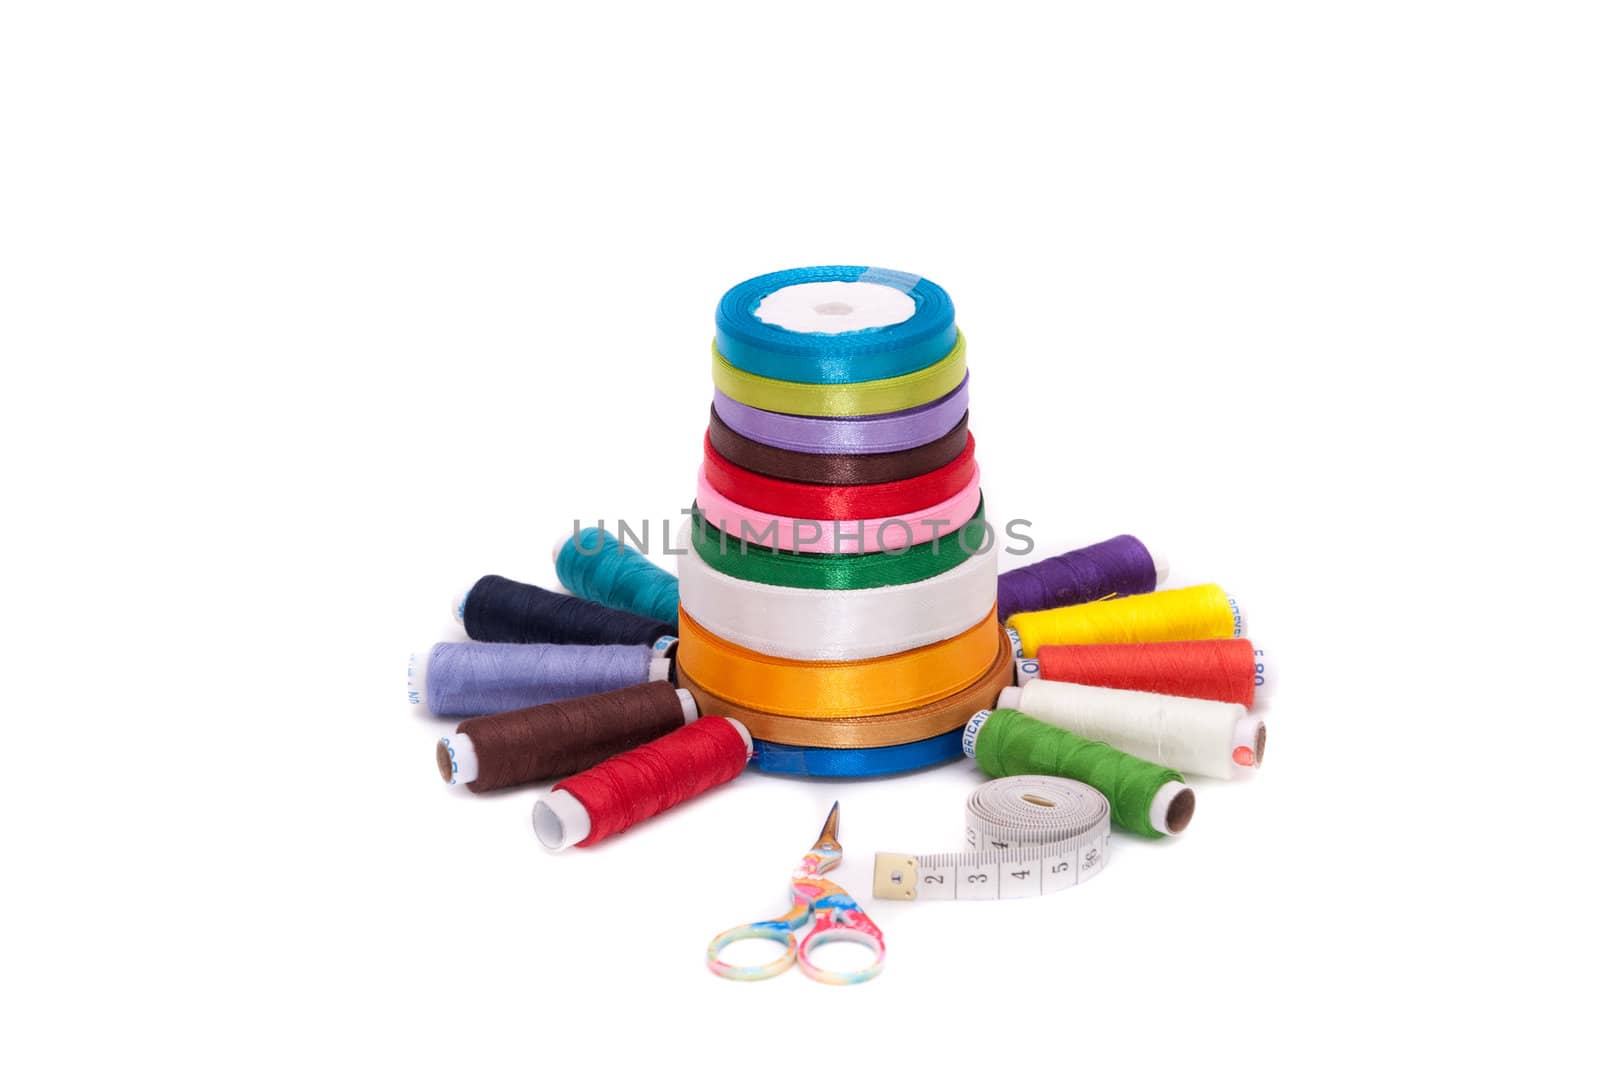 Colorful sewing kit